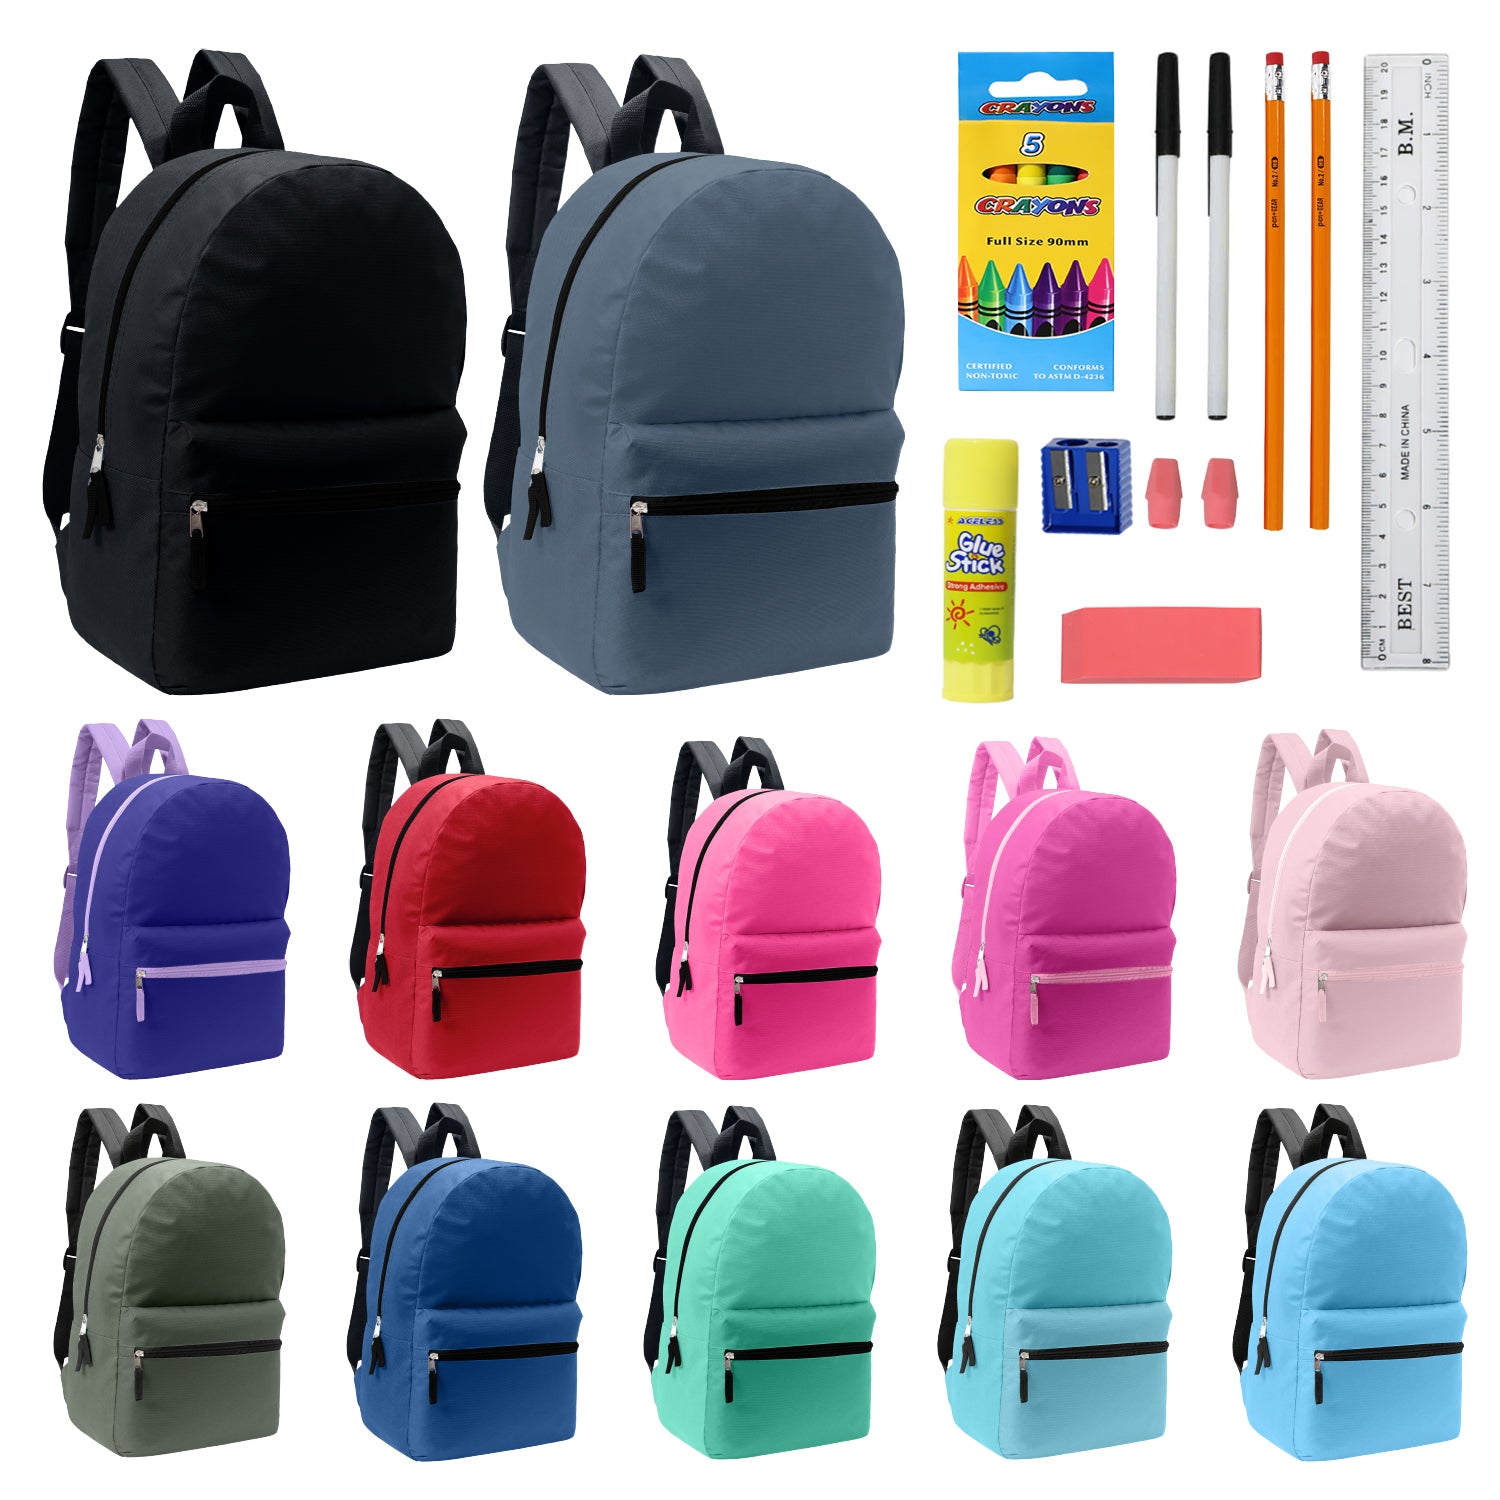 17 Inch Bulk Backpacks in Assorted Colors with School Supply Kits Wholesale - Case of 12